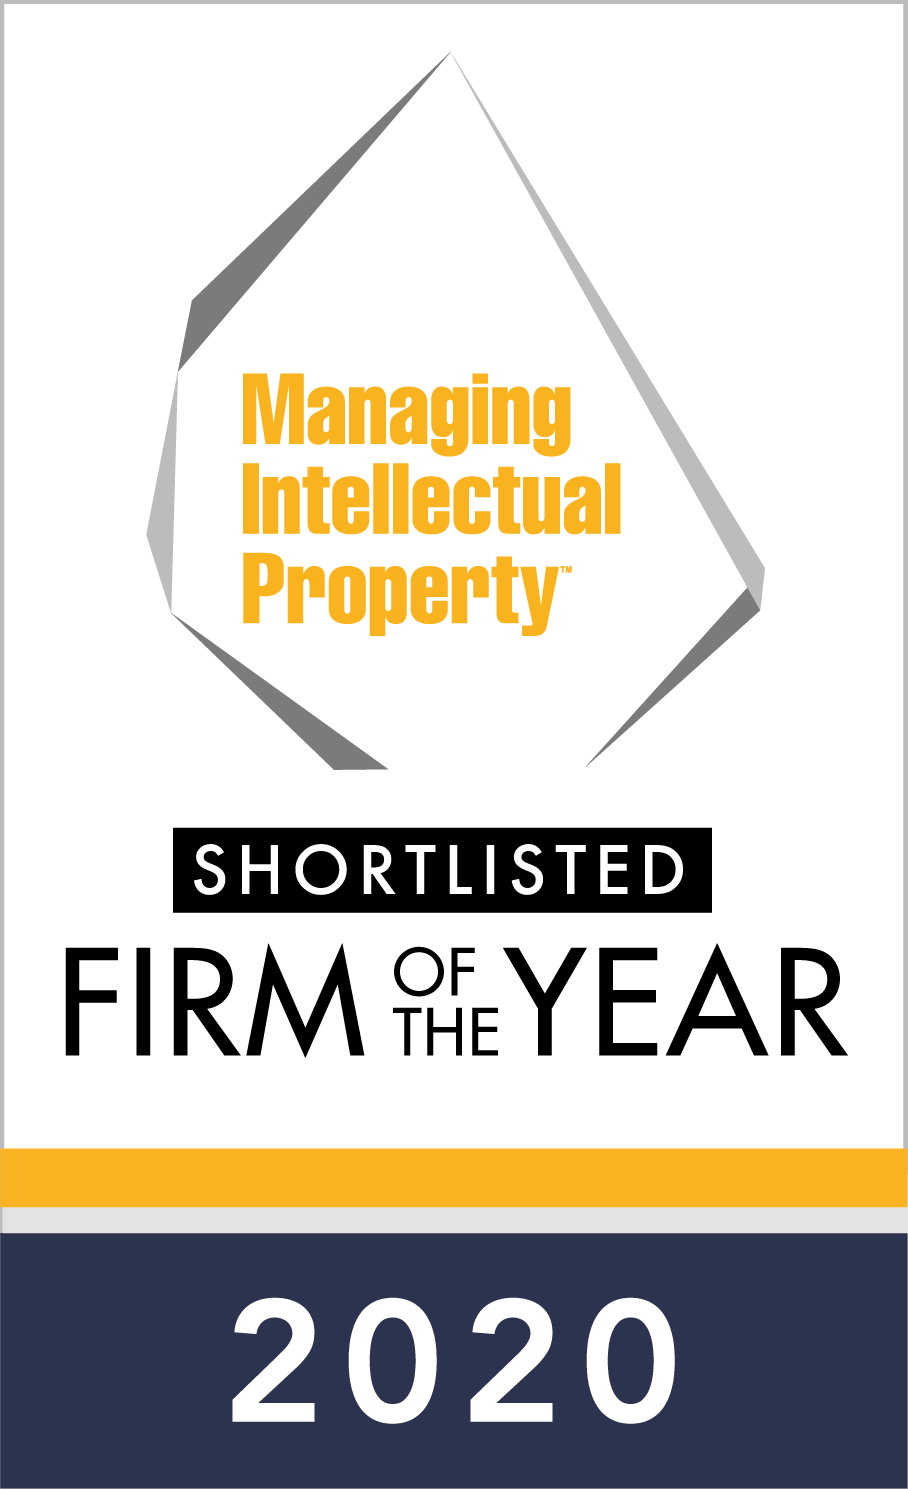 MIP Firm of the Year 2020 shortlisted